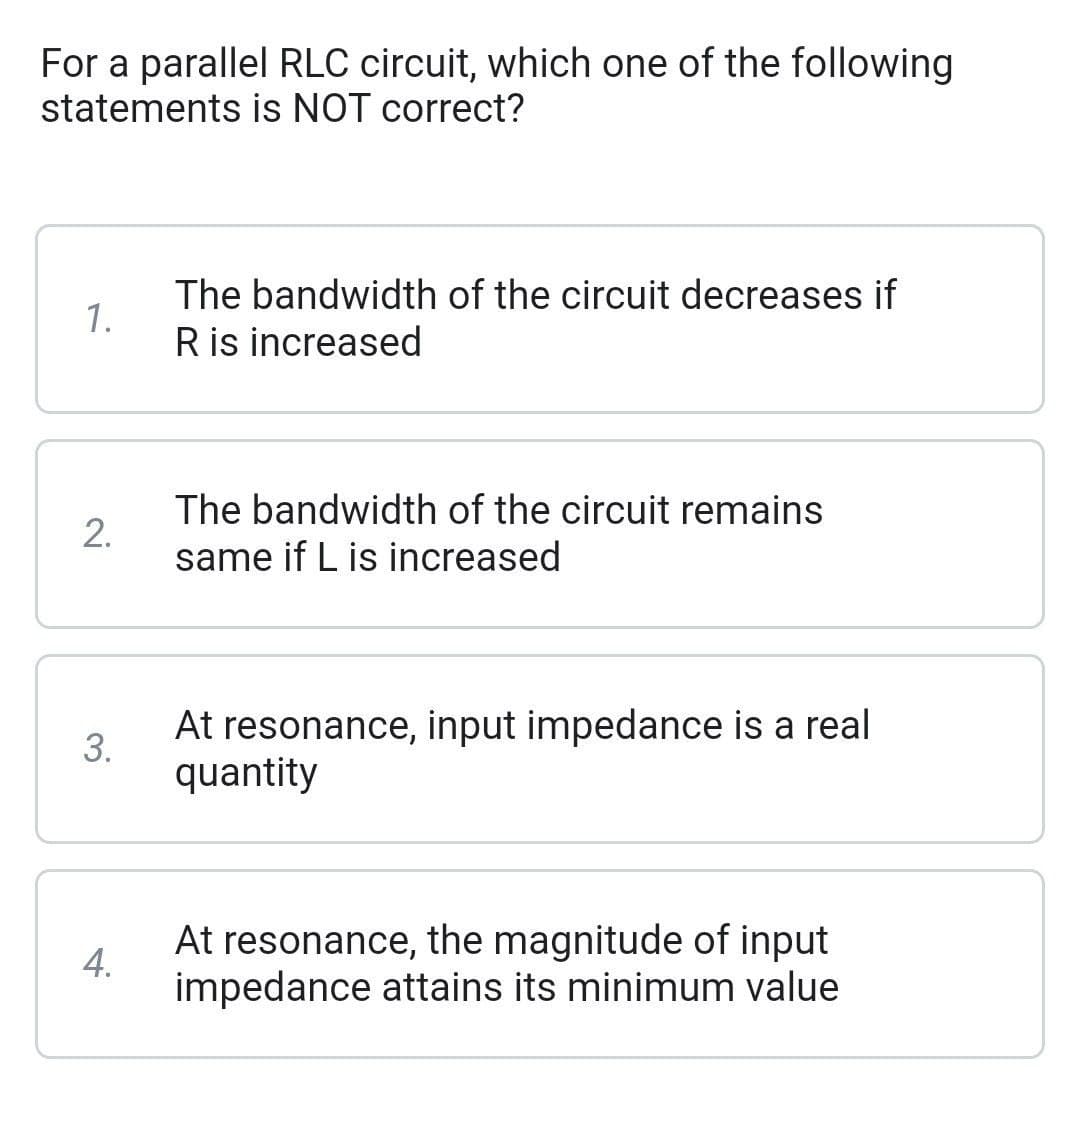 For a parallel RLC circuit, which one of the following
statements is NOT correct?
1.
2.
3.
4.
The bandwidth of the circuit decreases if
R is increased
The bandwidth of the circuit remains
same if L is increased
At resonance, input impedance is a real
quantity
At resonance, the magnitude of input
impedance attains its minimum value